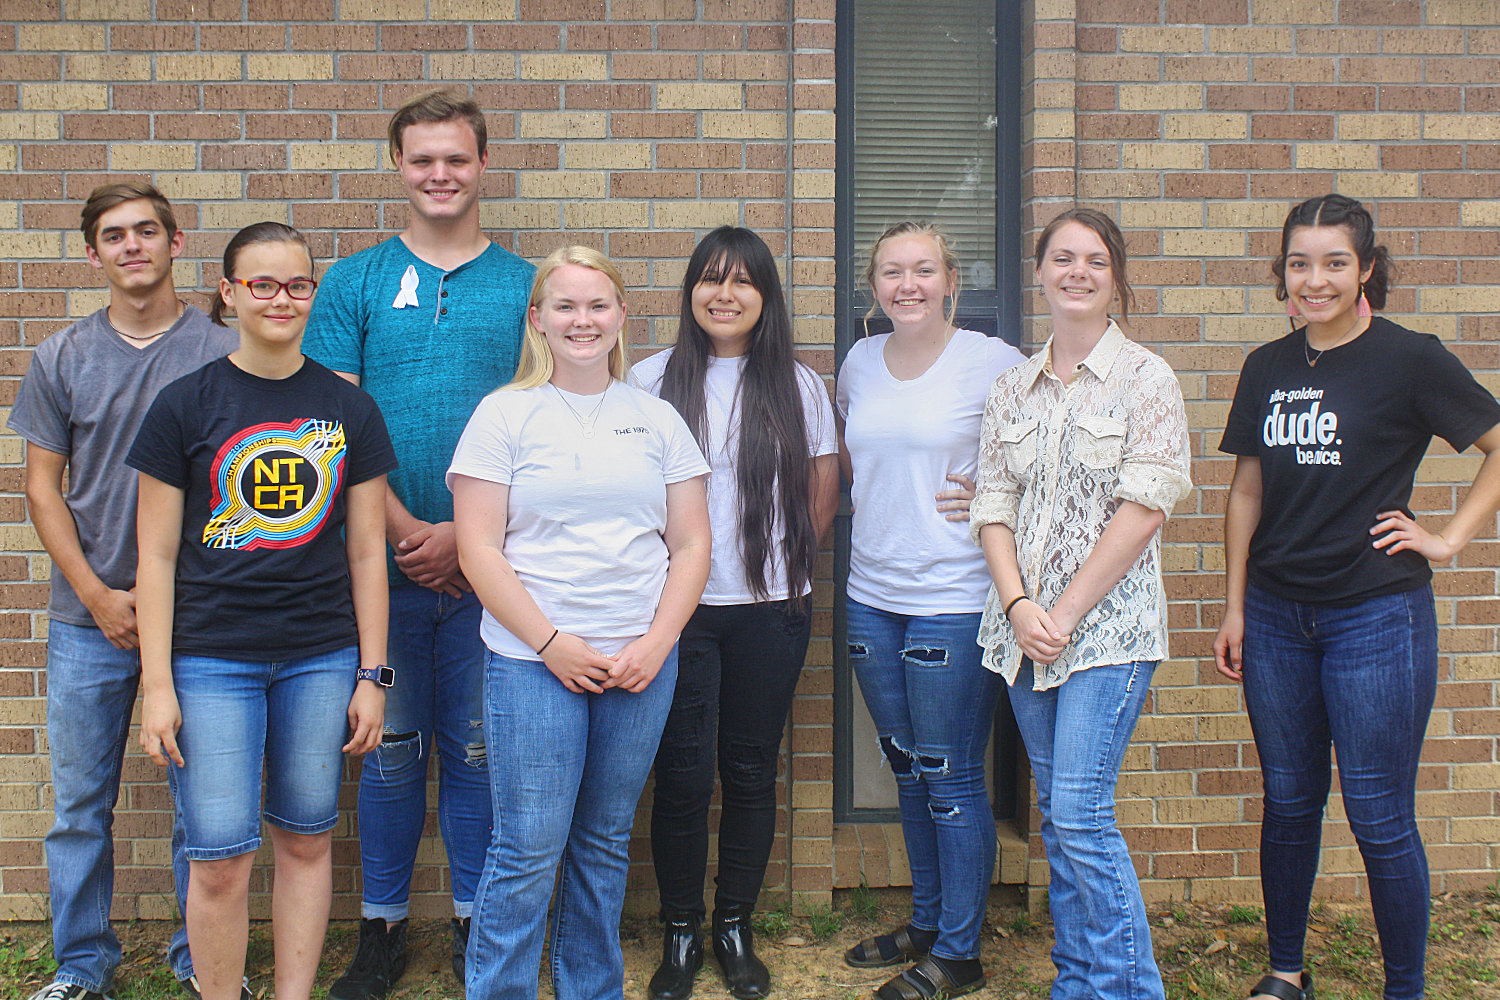 New members of the Alba-Golden color guard are, from left, Michael Kumm, Lizzie Whitecotton, Donny Humphreys, Kaya McAninch, Nayeli Camacho (co-captain), Nikki Meade (co-captain), Jasmine Weed and Fatima Cerrito.